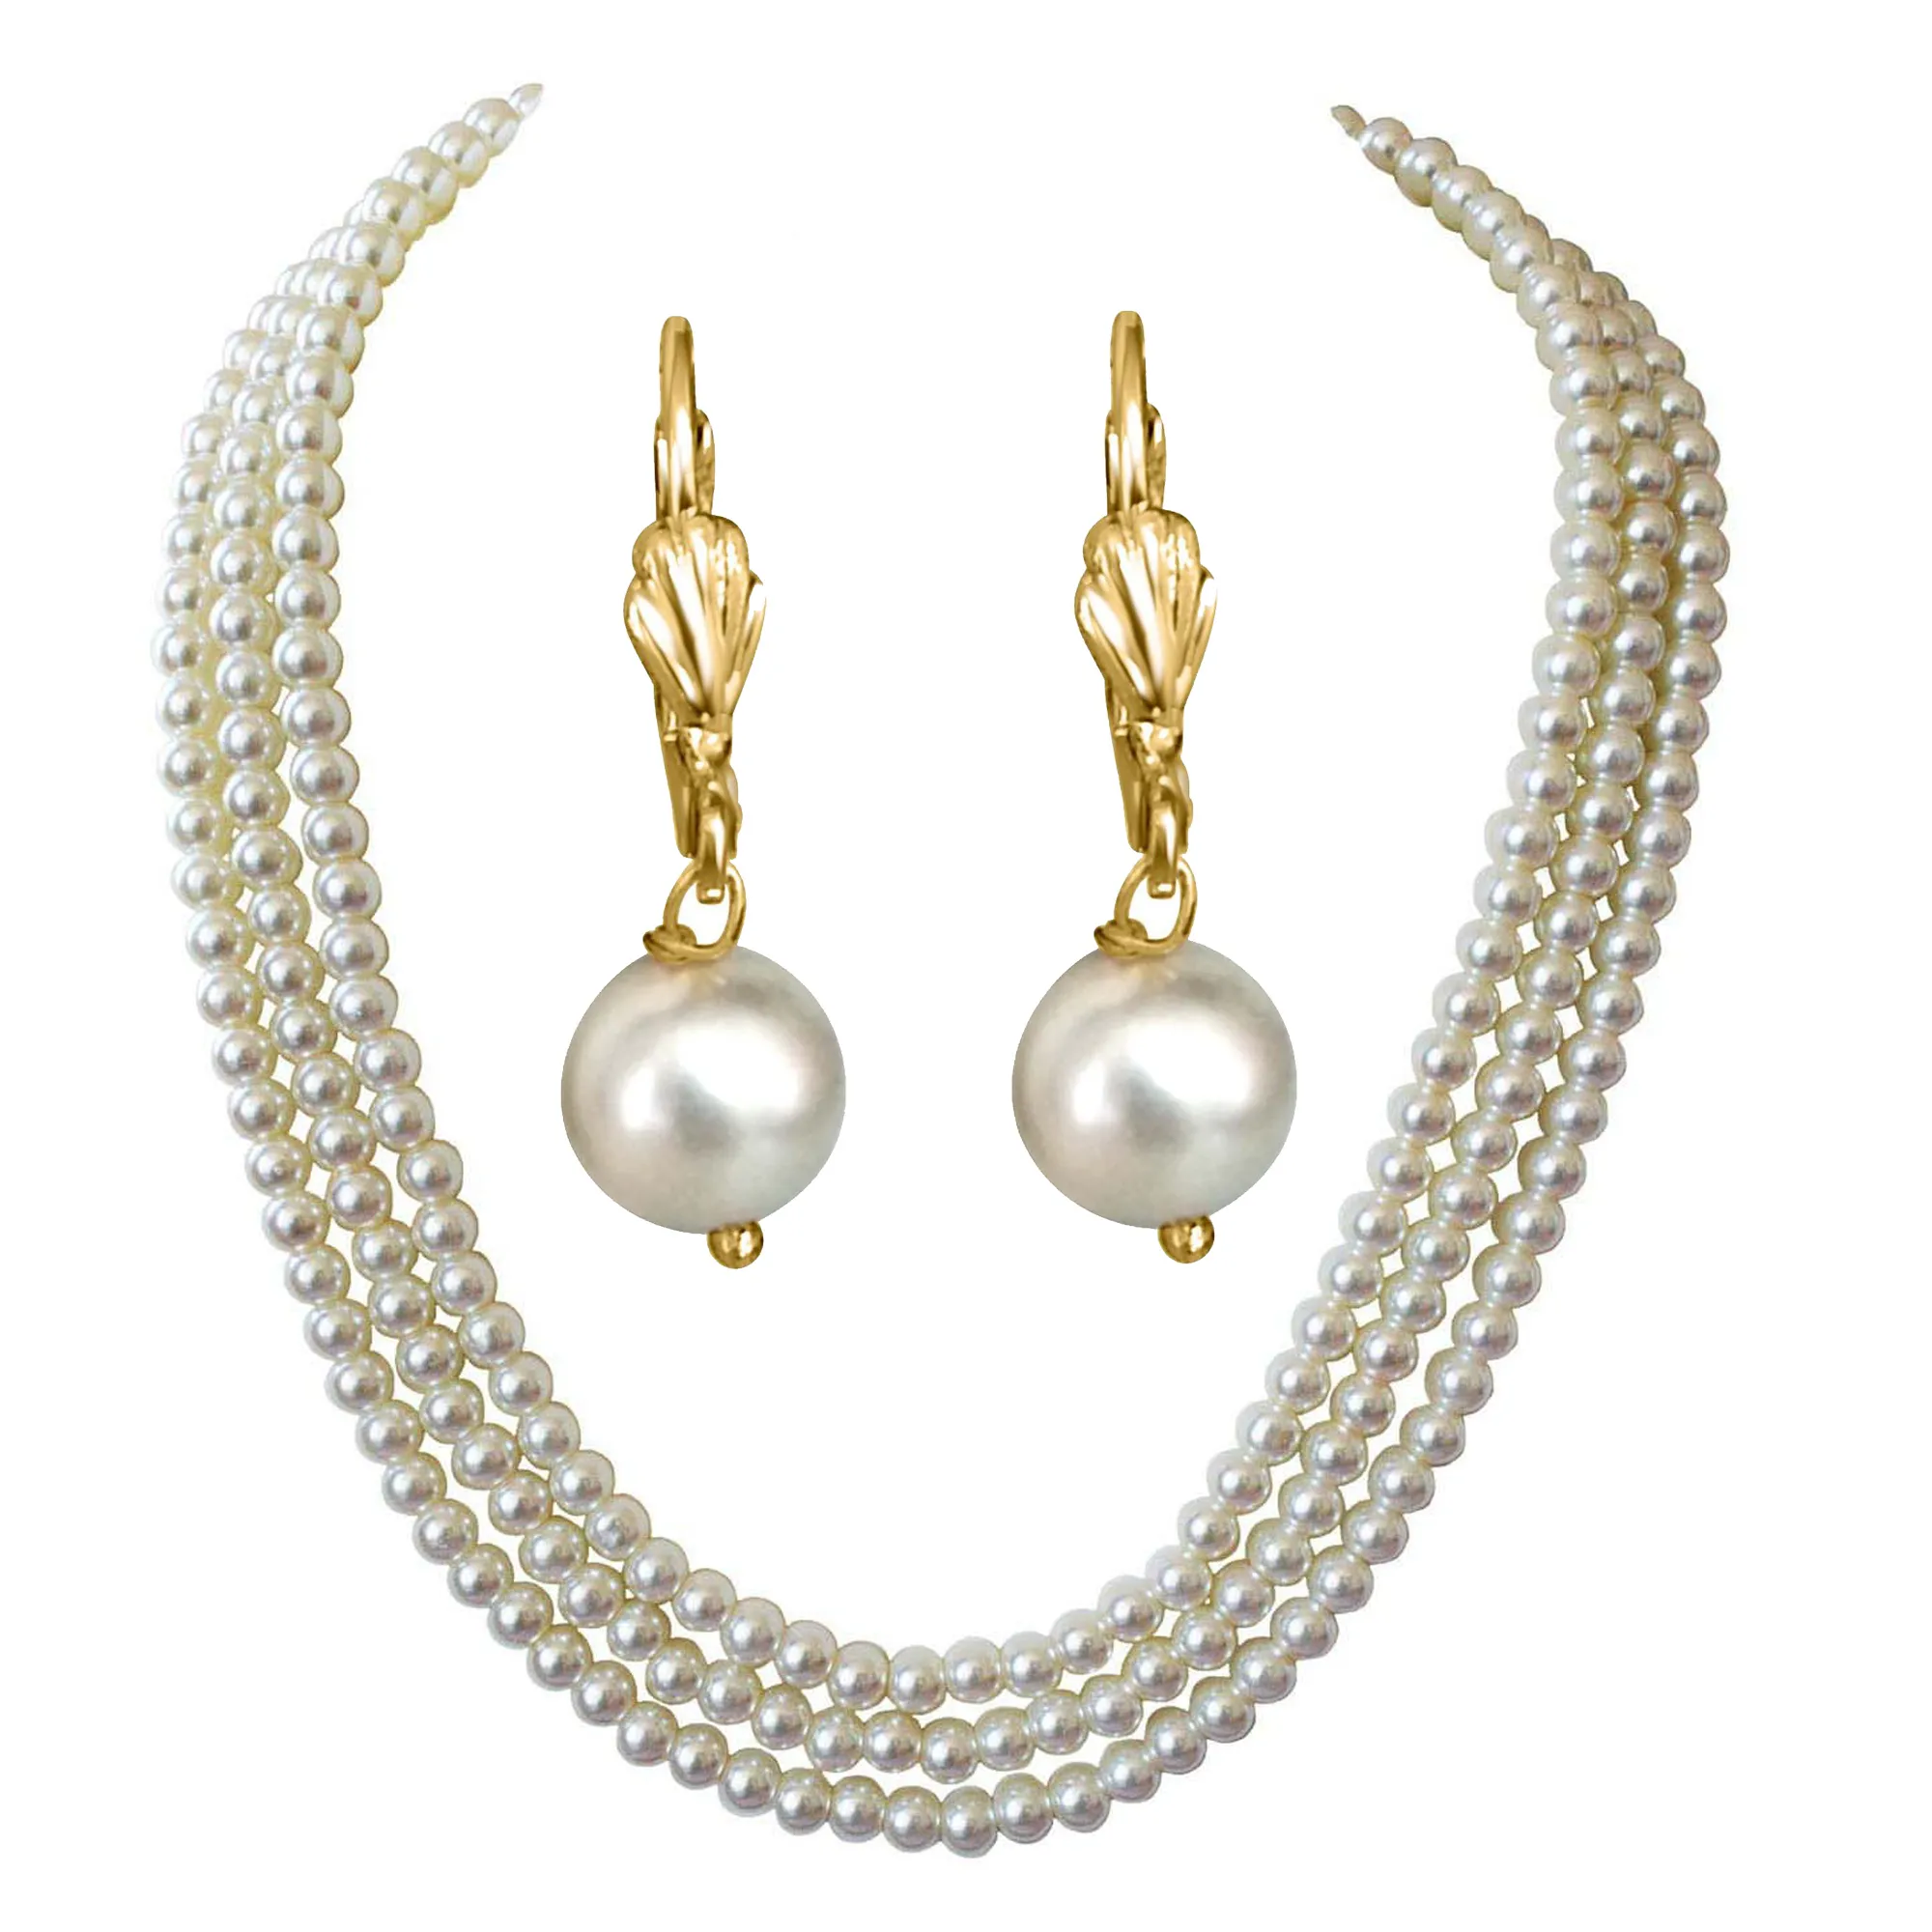 3 Line Heavy Looking White Shell Pearl Necklace & Earrings  (PS580+SE172)